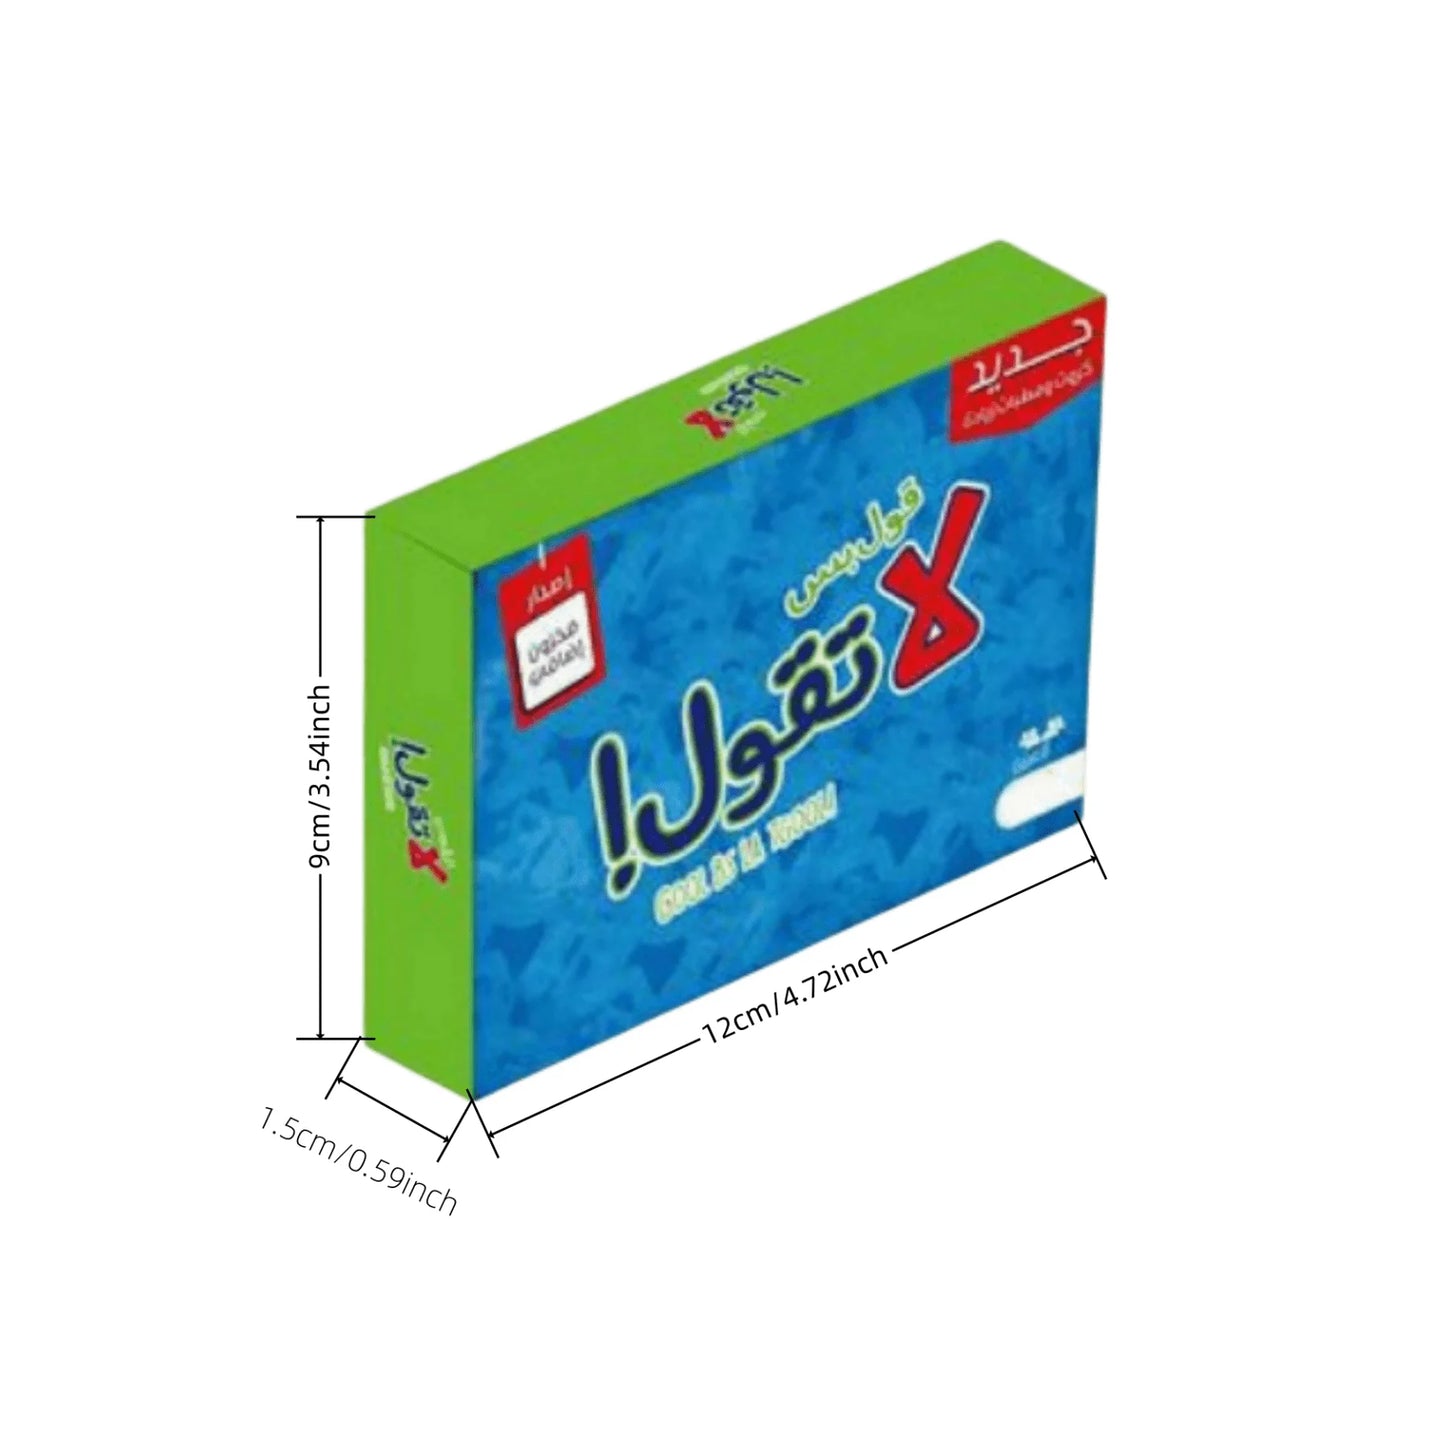 Arabic version with no time limit, card game, board game, tabletop game, perfect as a gift or to play together at a party!